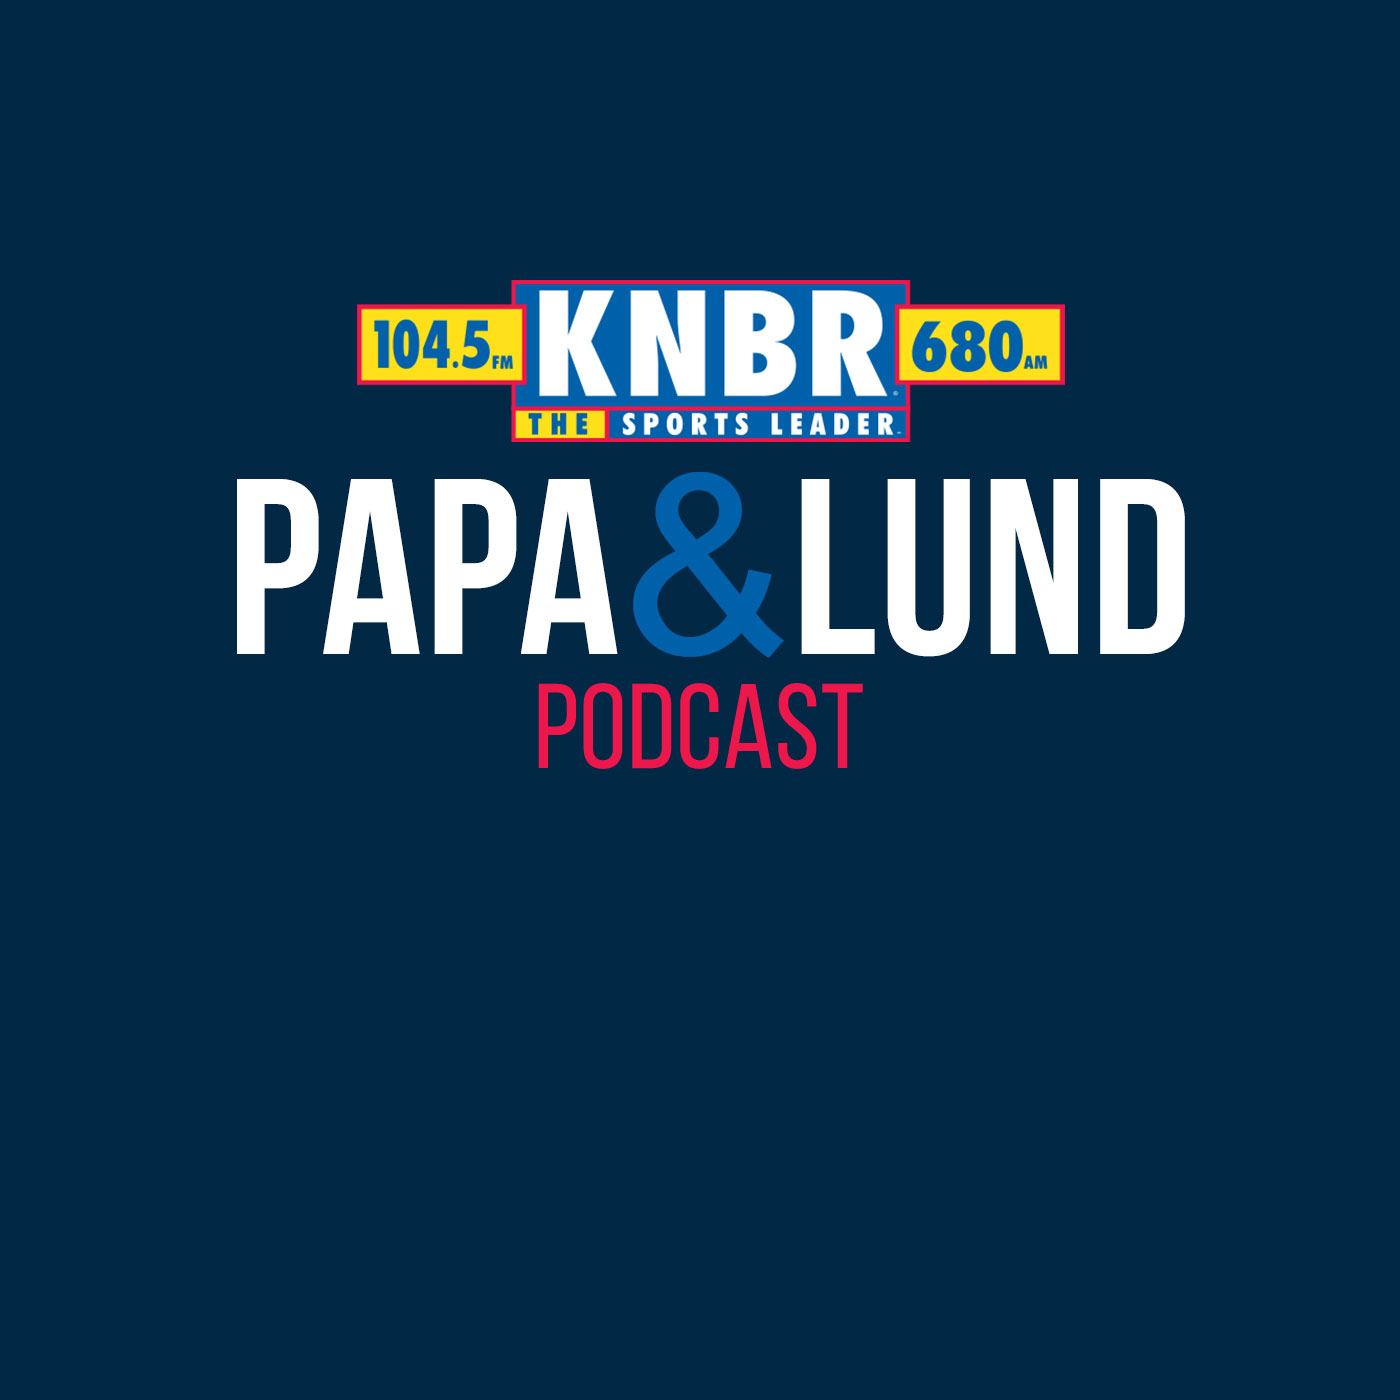 3-18 Jon Miller joins Papa & Lund to discuss the Giants young pitching rotation and if they are up for the challenge as well as his thoughts on the great Renel Brooks-Moon